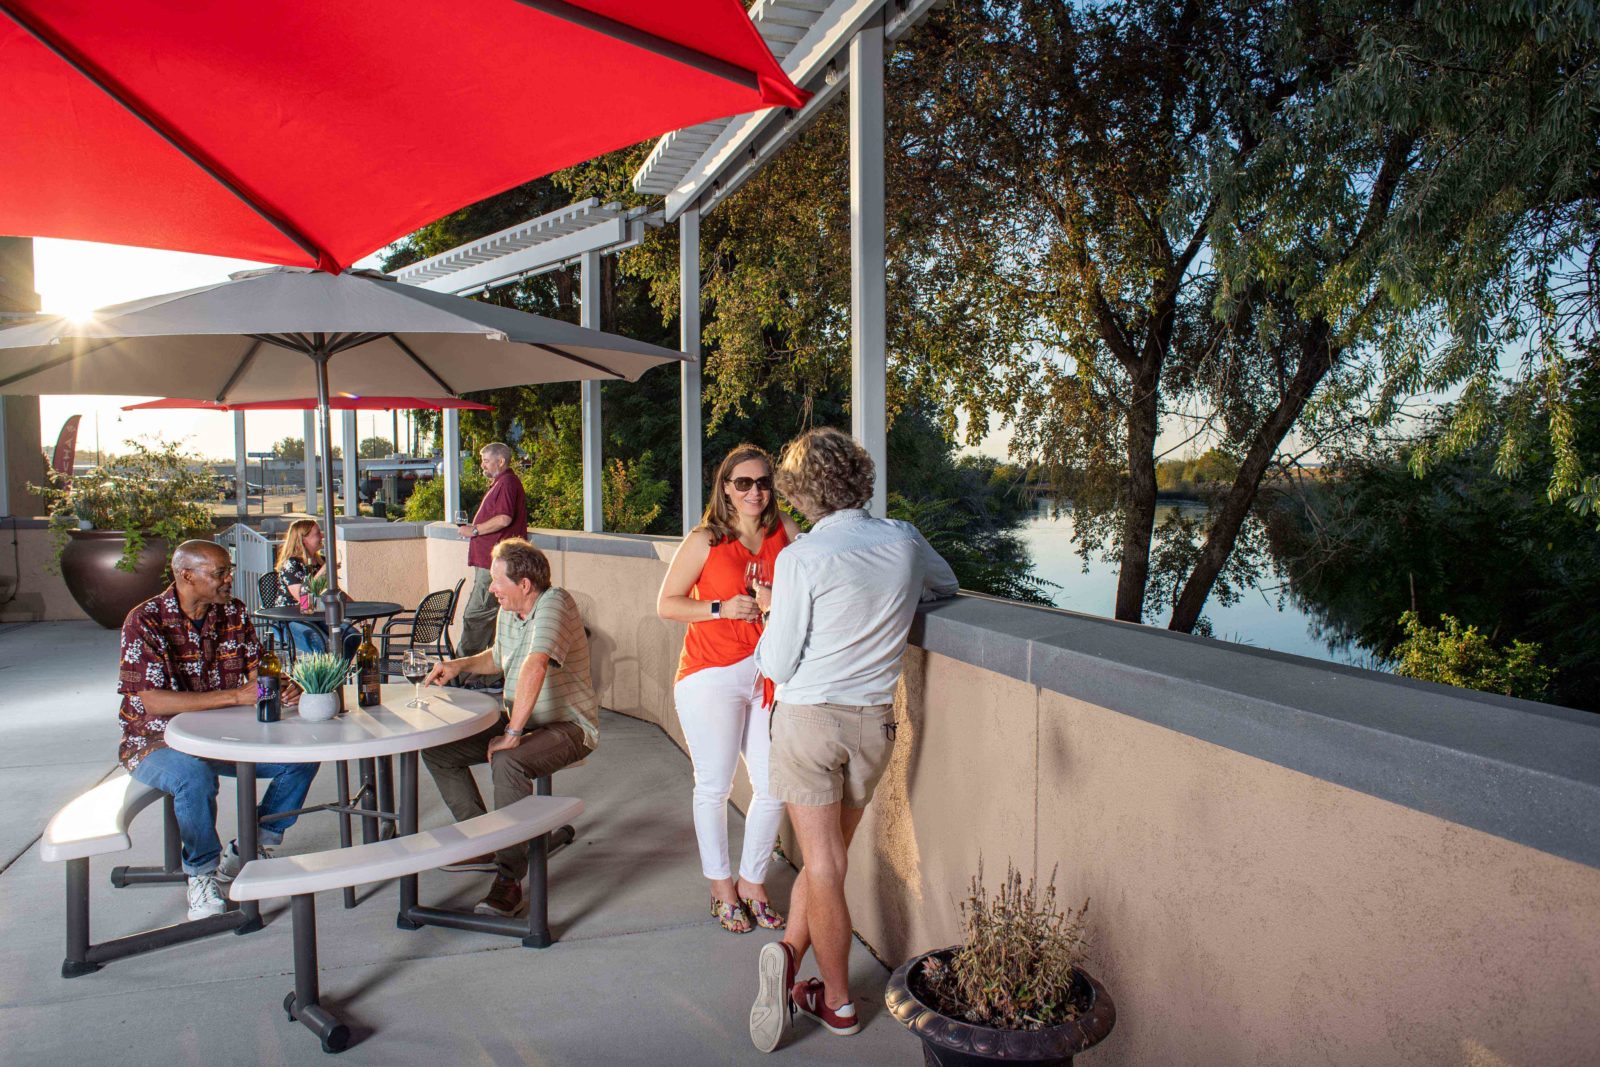 Friends sipping wine and taking in the waterfront views from one of the outdoor patios.